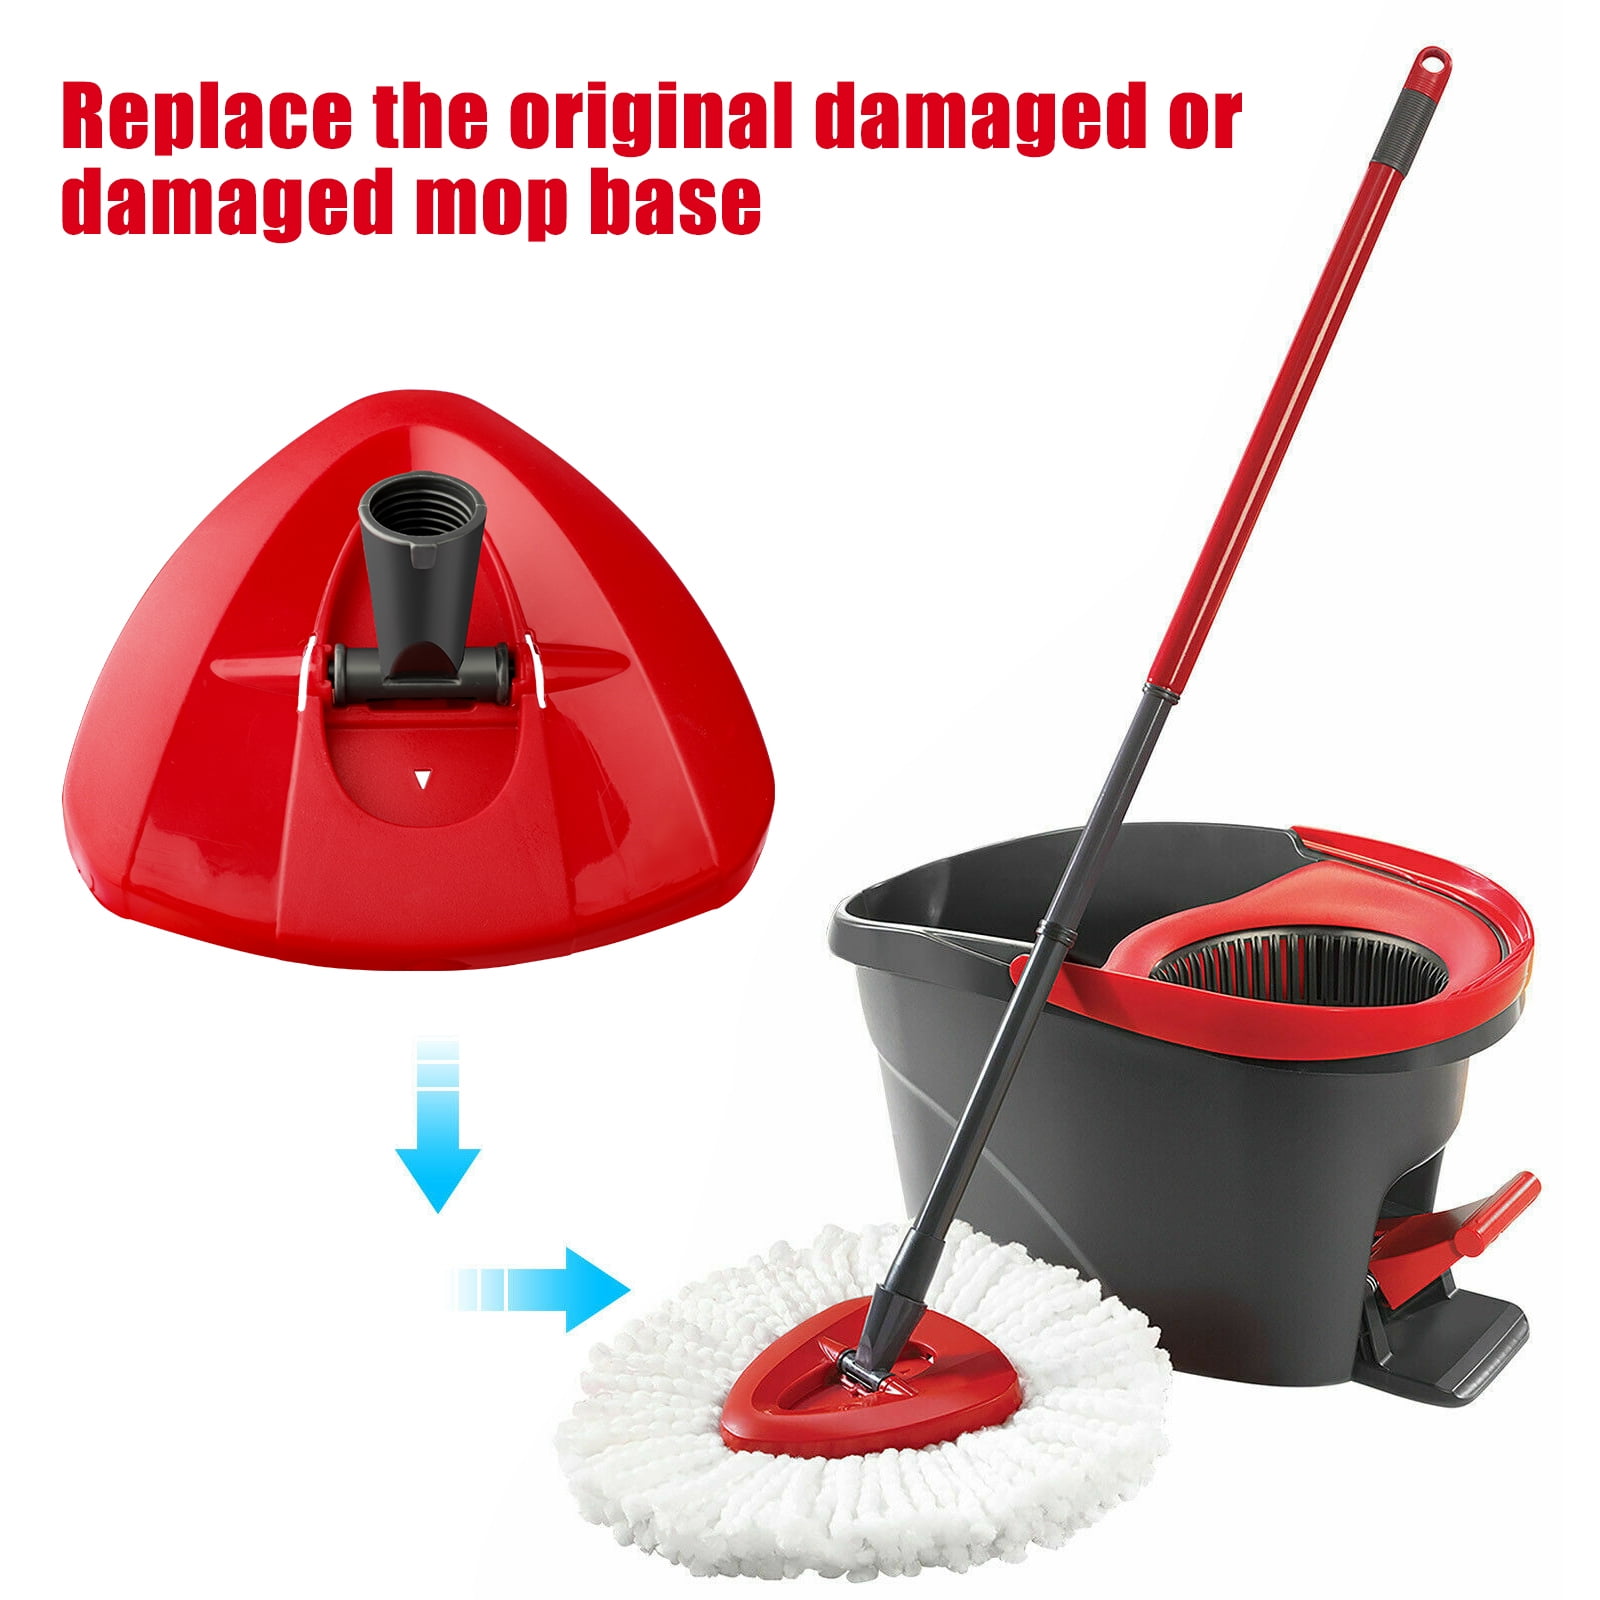 1 Ct Spin Mop Replacement Base Head Rotating Triangle Spinning Mop Replace Cover Plastic Base Case Disc Accessories Part 